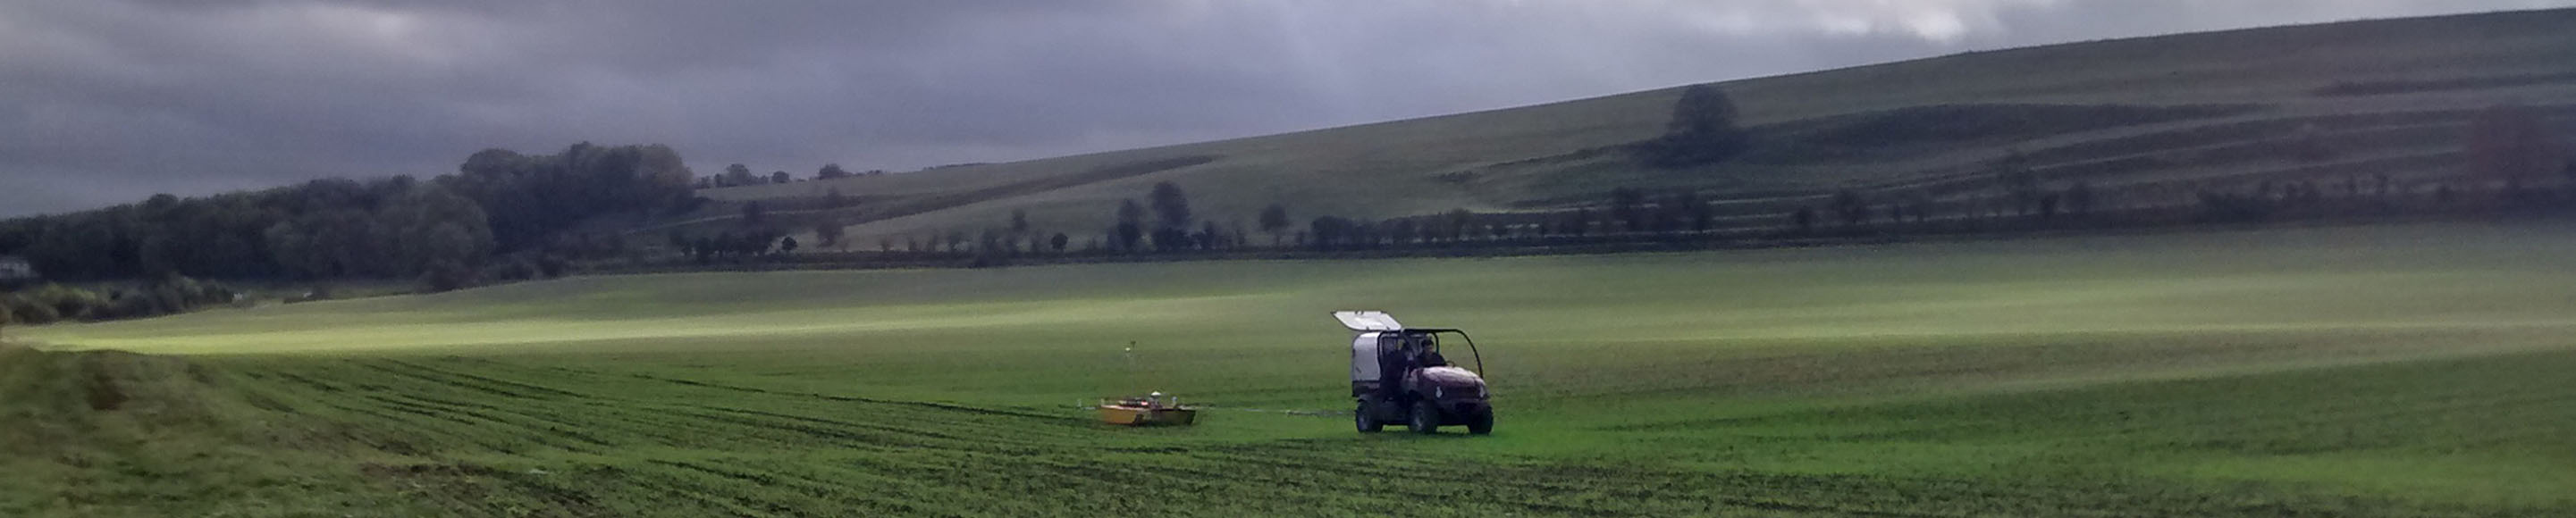 Colour photograph of buggy pulling a "sledge" across a field with germinating crop under a threatening sky heavy with clouds